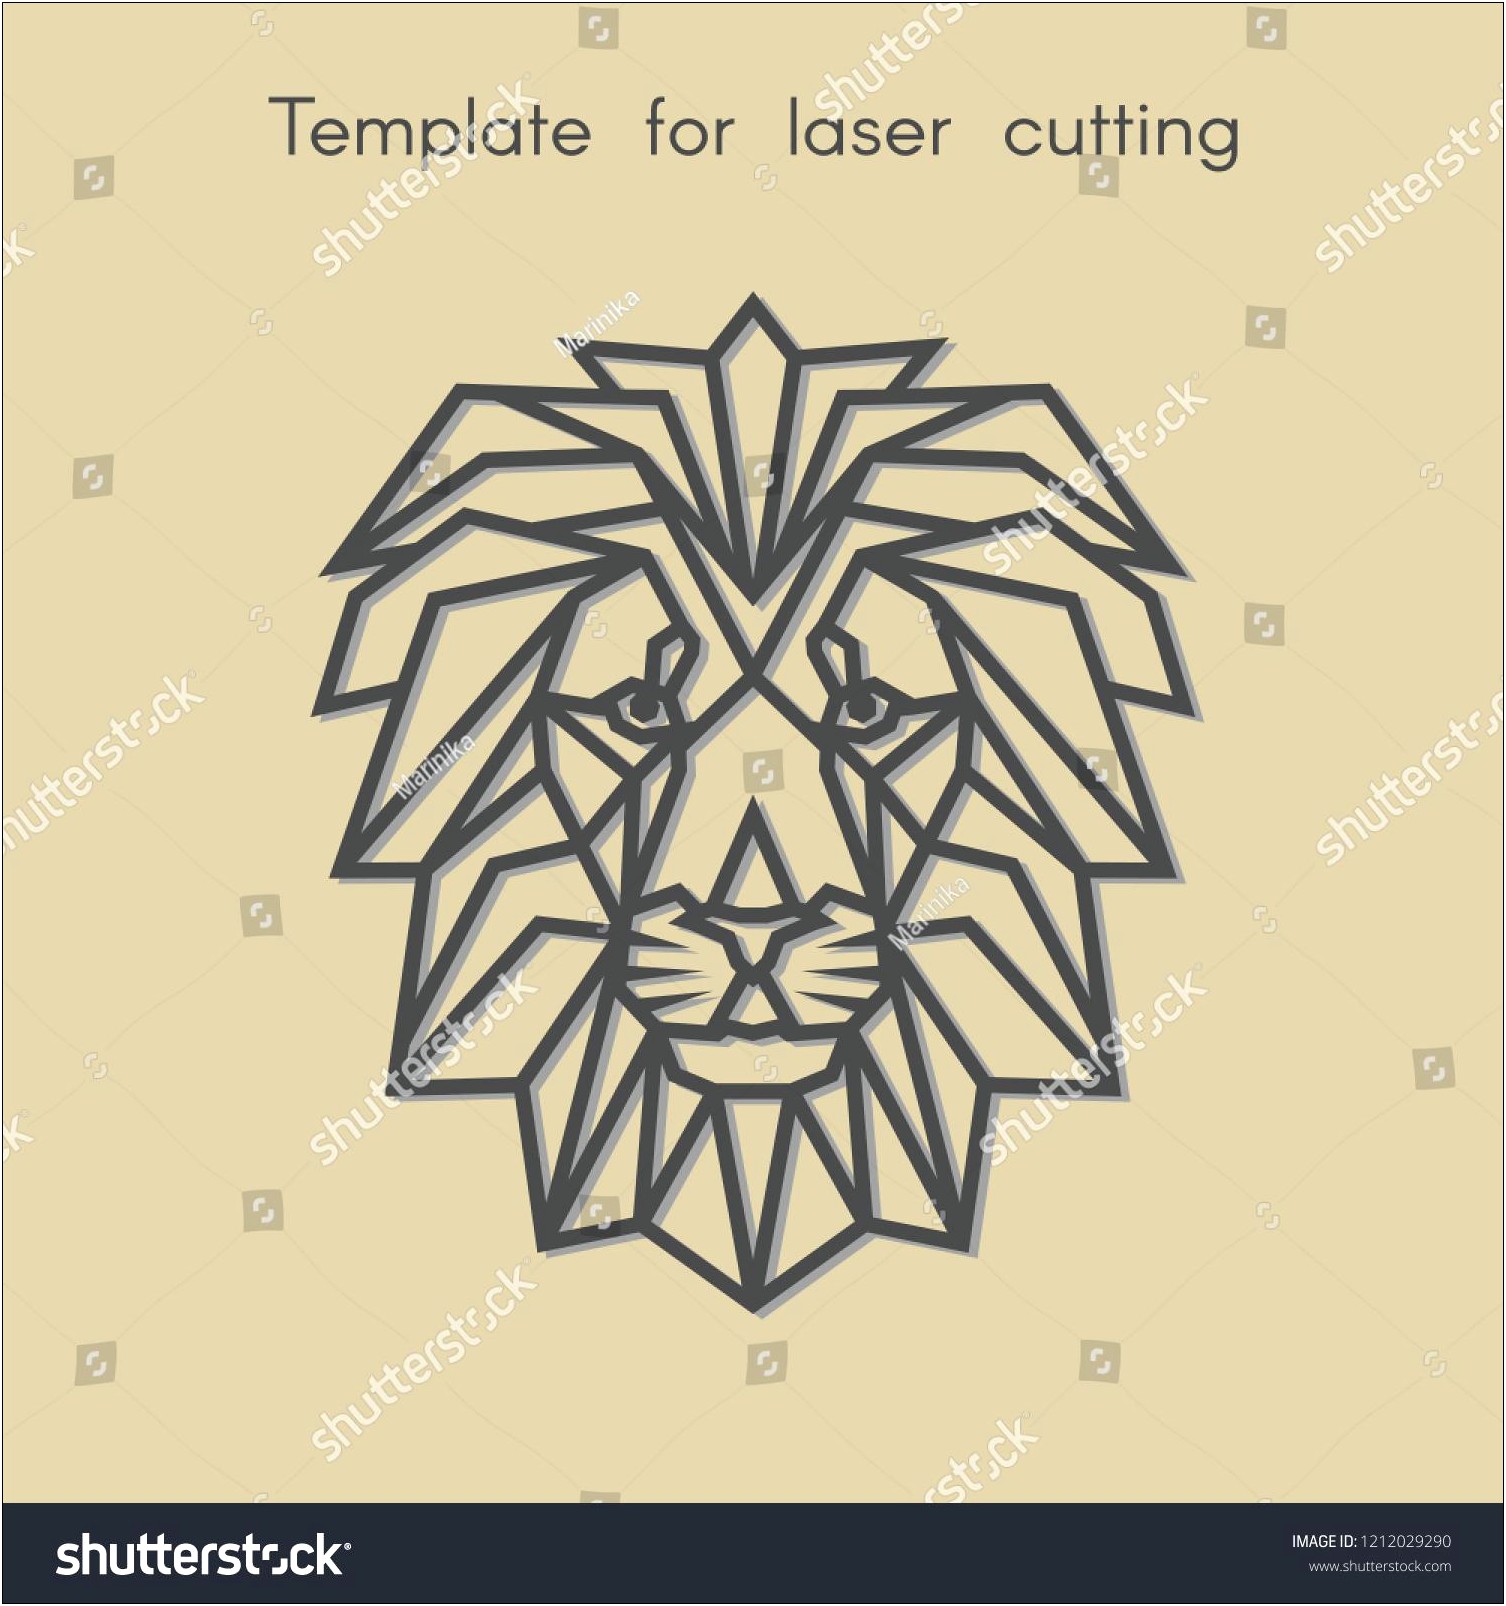 Free Animal Templates To Cut Out